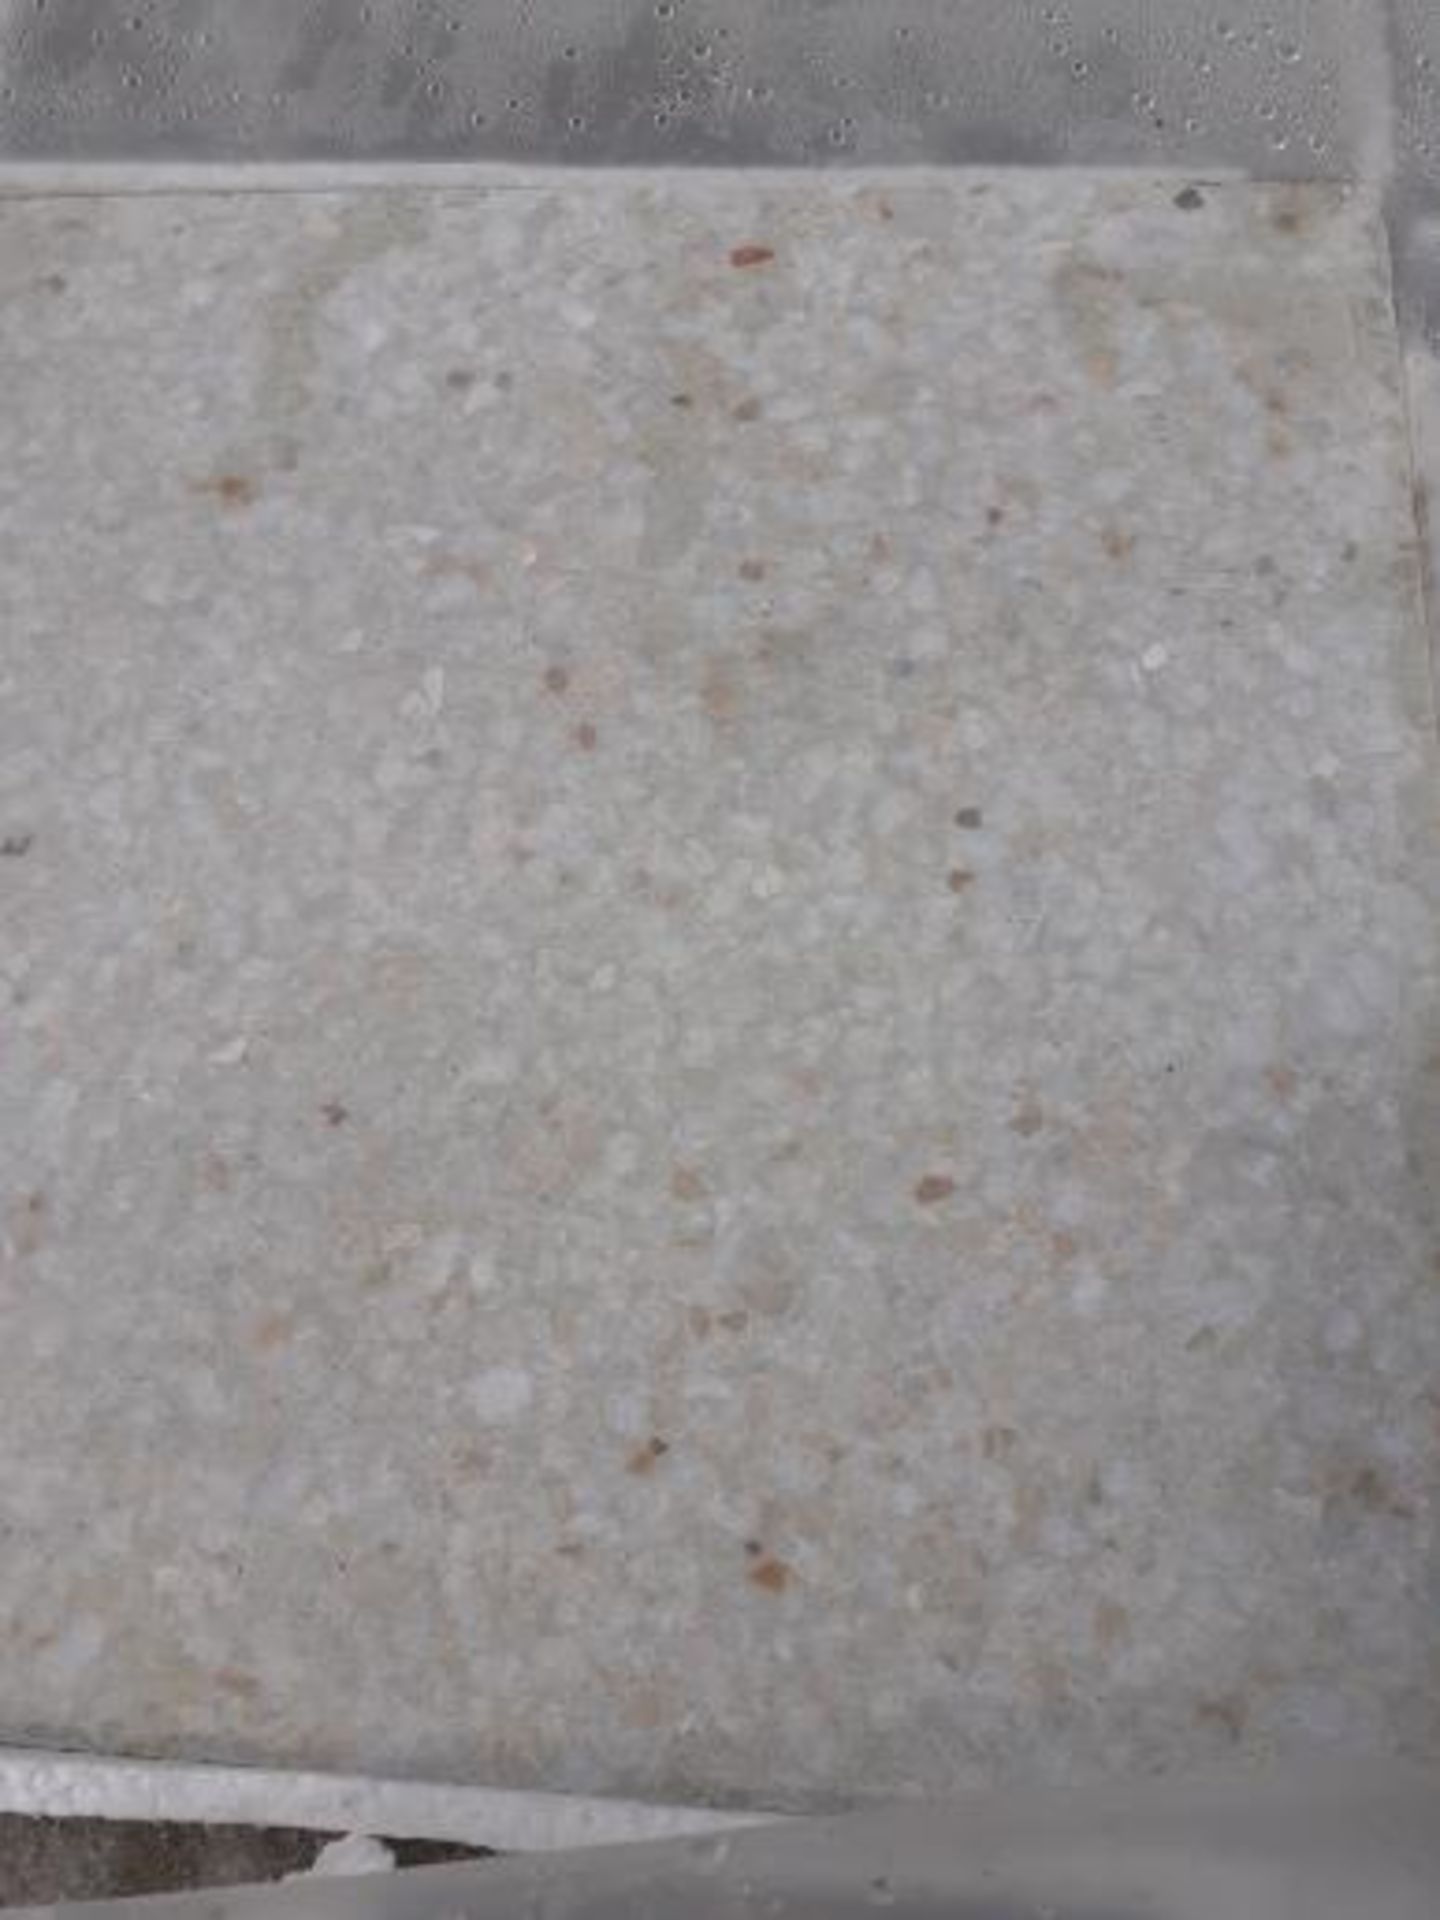 1 PALLET OF BRAND NEW TERRAZZO COMMERCIAL FLOOR TILES (Z30011), COVERS 24 SQUARE YARDS *PLUS VAT* - Image 9 of 14